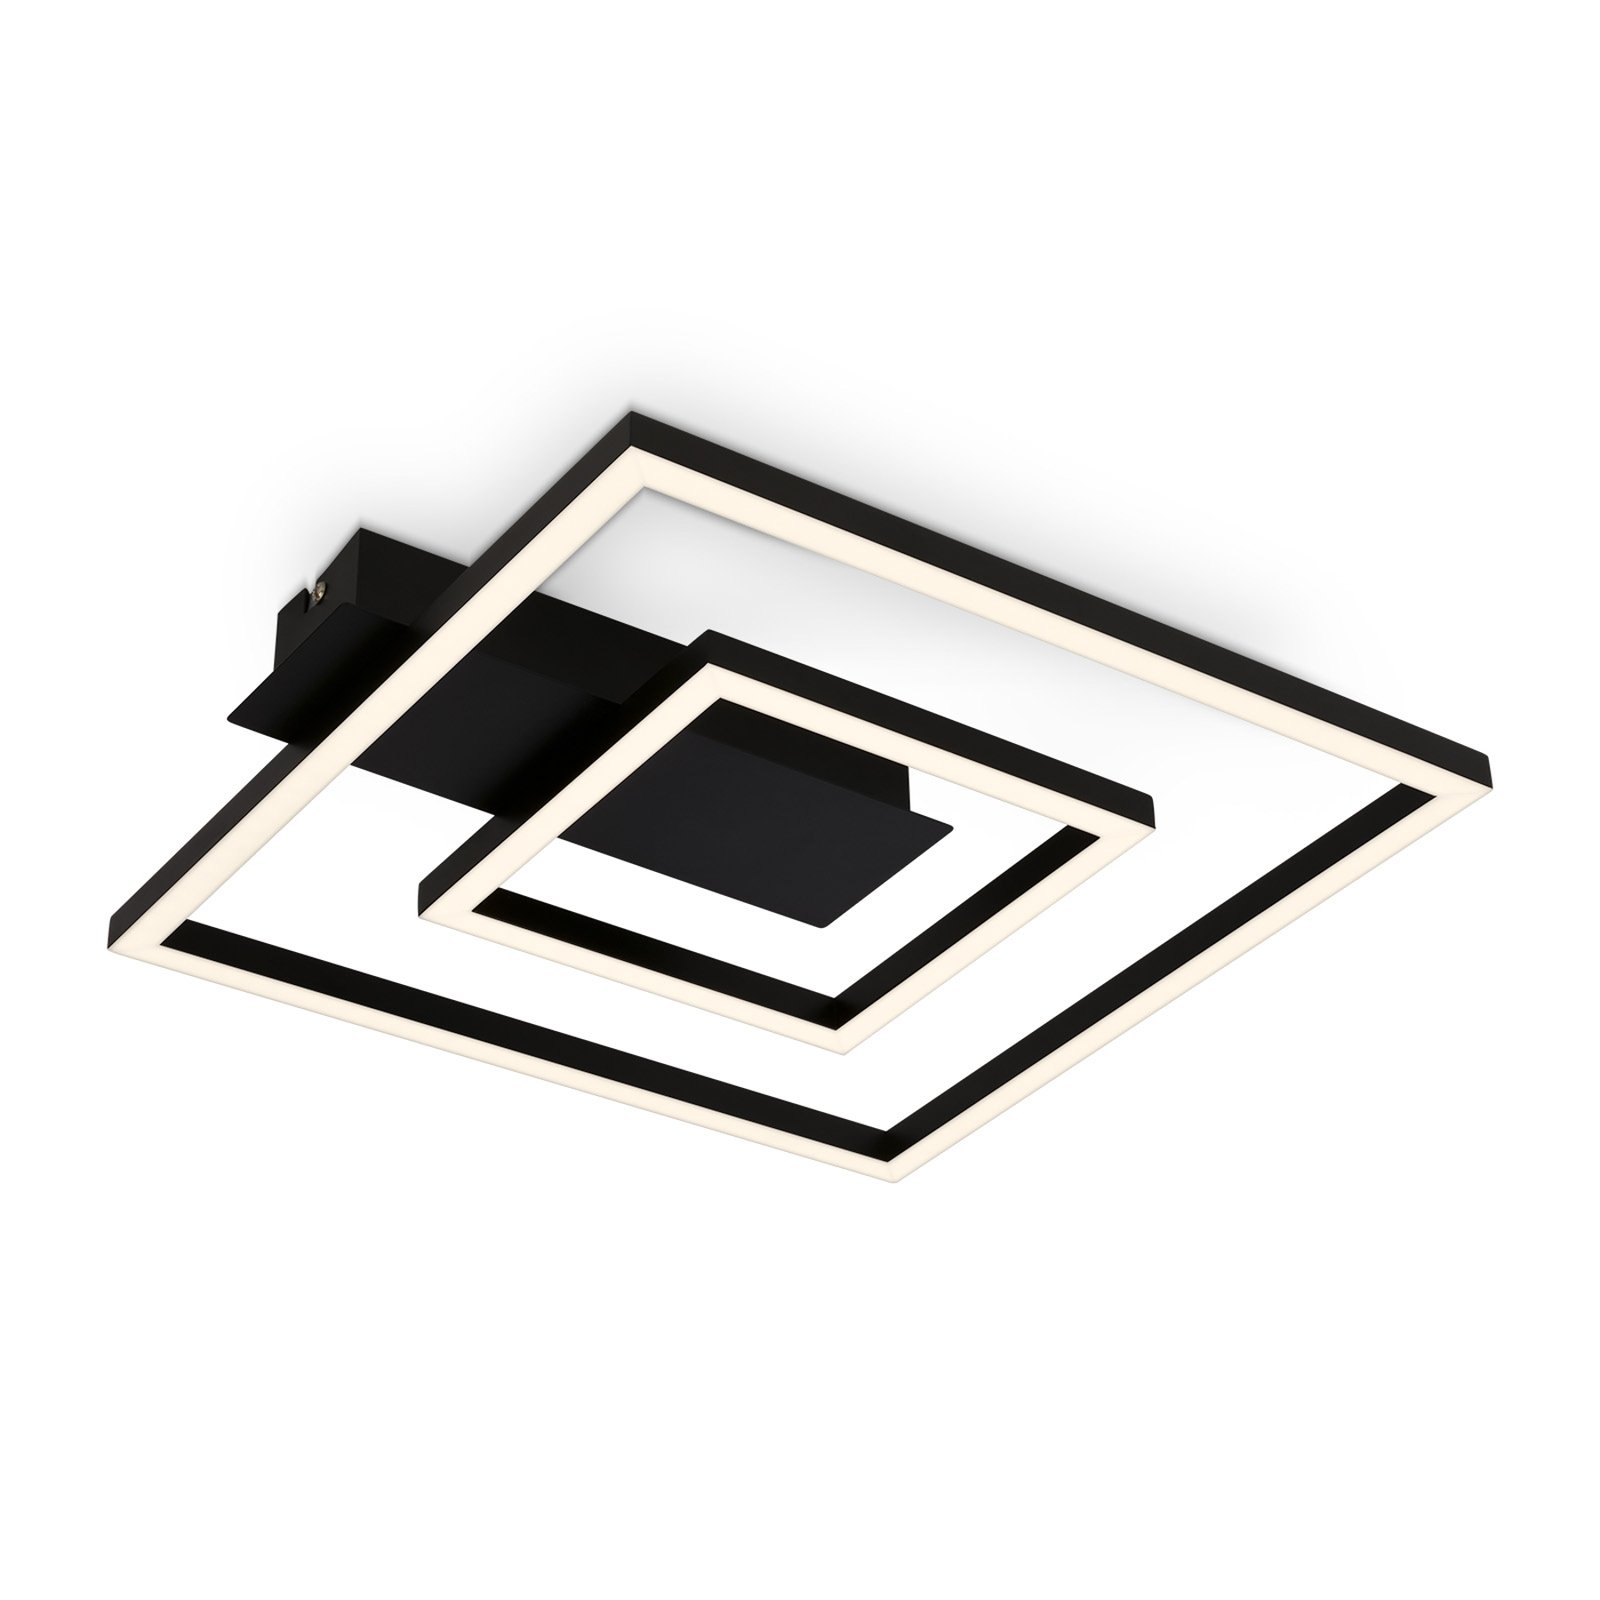 3772 LED ceiling light with two frames, black